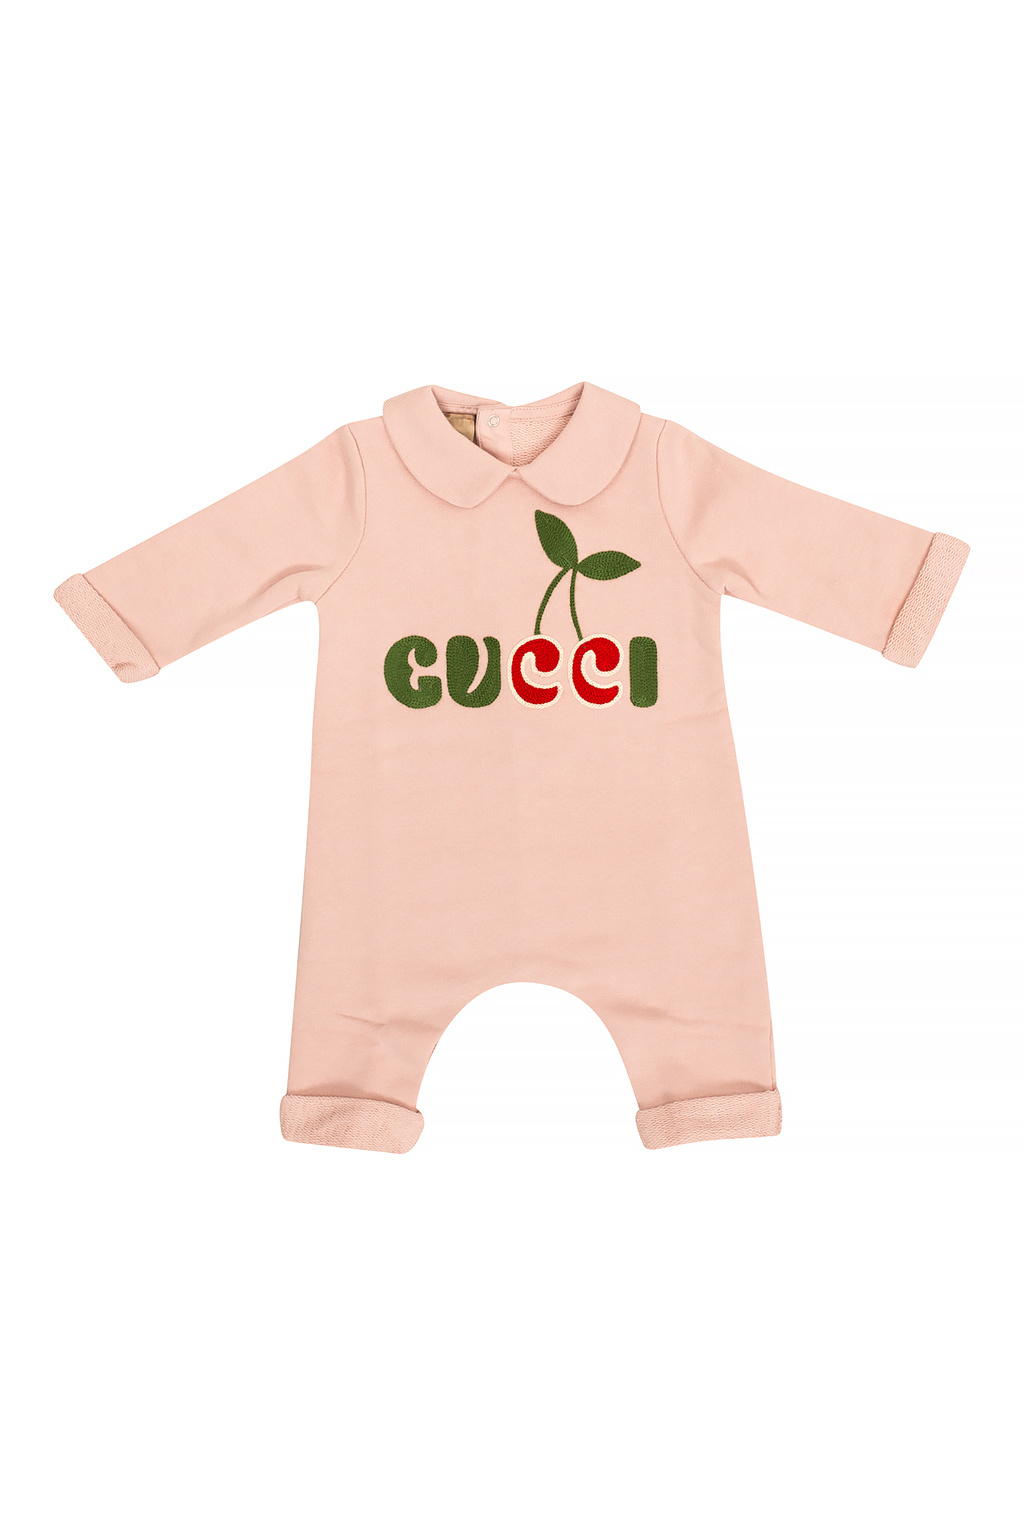 Gucci Baby Clothes 